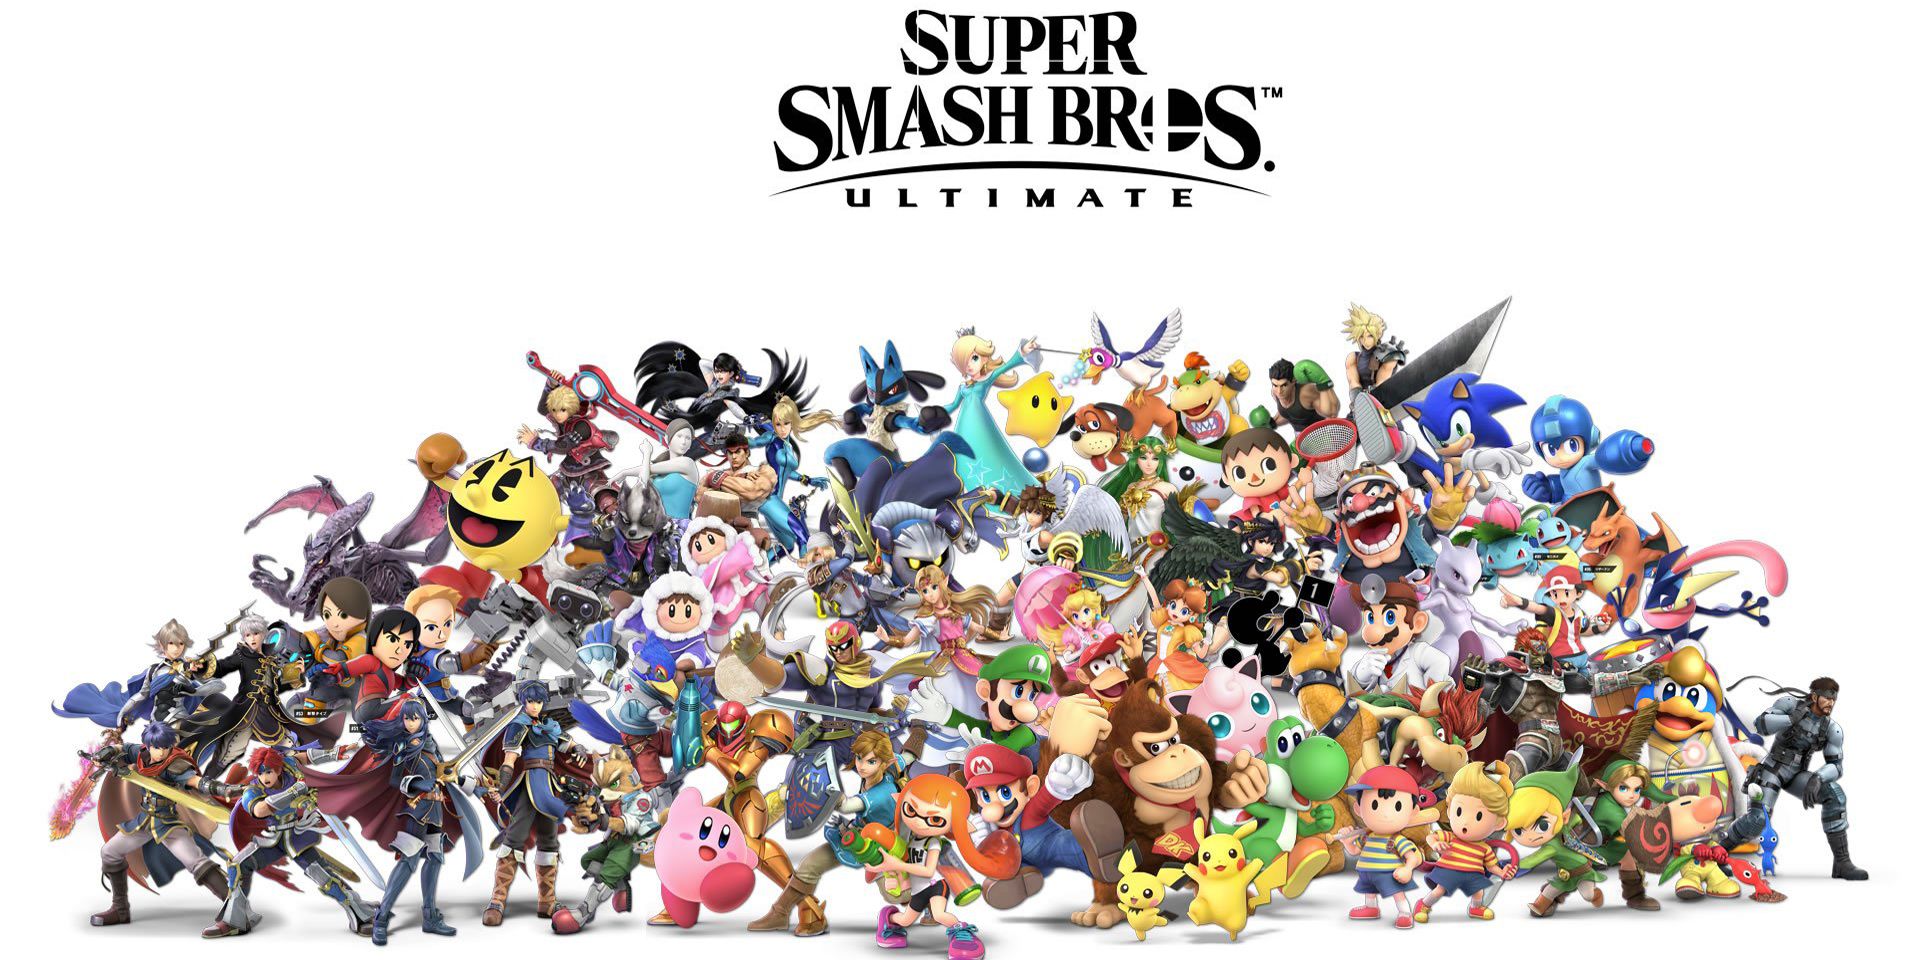 What Super Smash Bros. Character Should You Play With Based On Your MBTI®